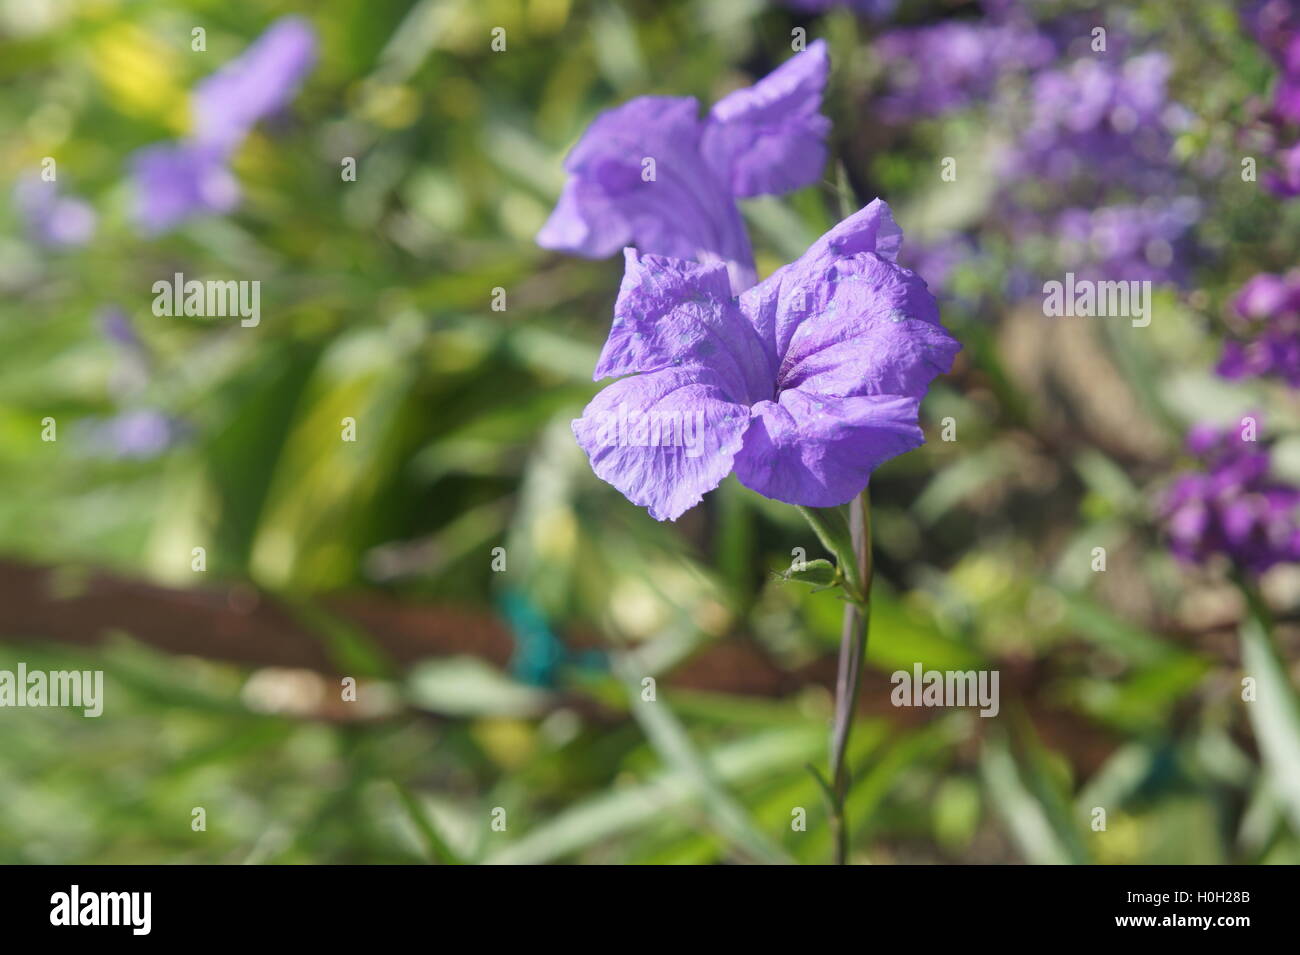 Close up image of a flower Stock Photo